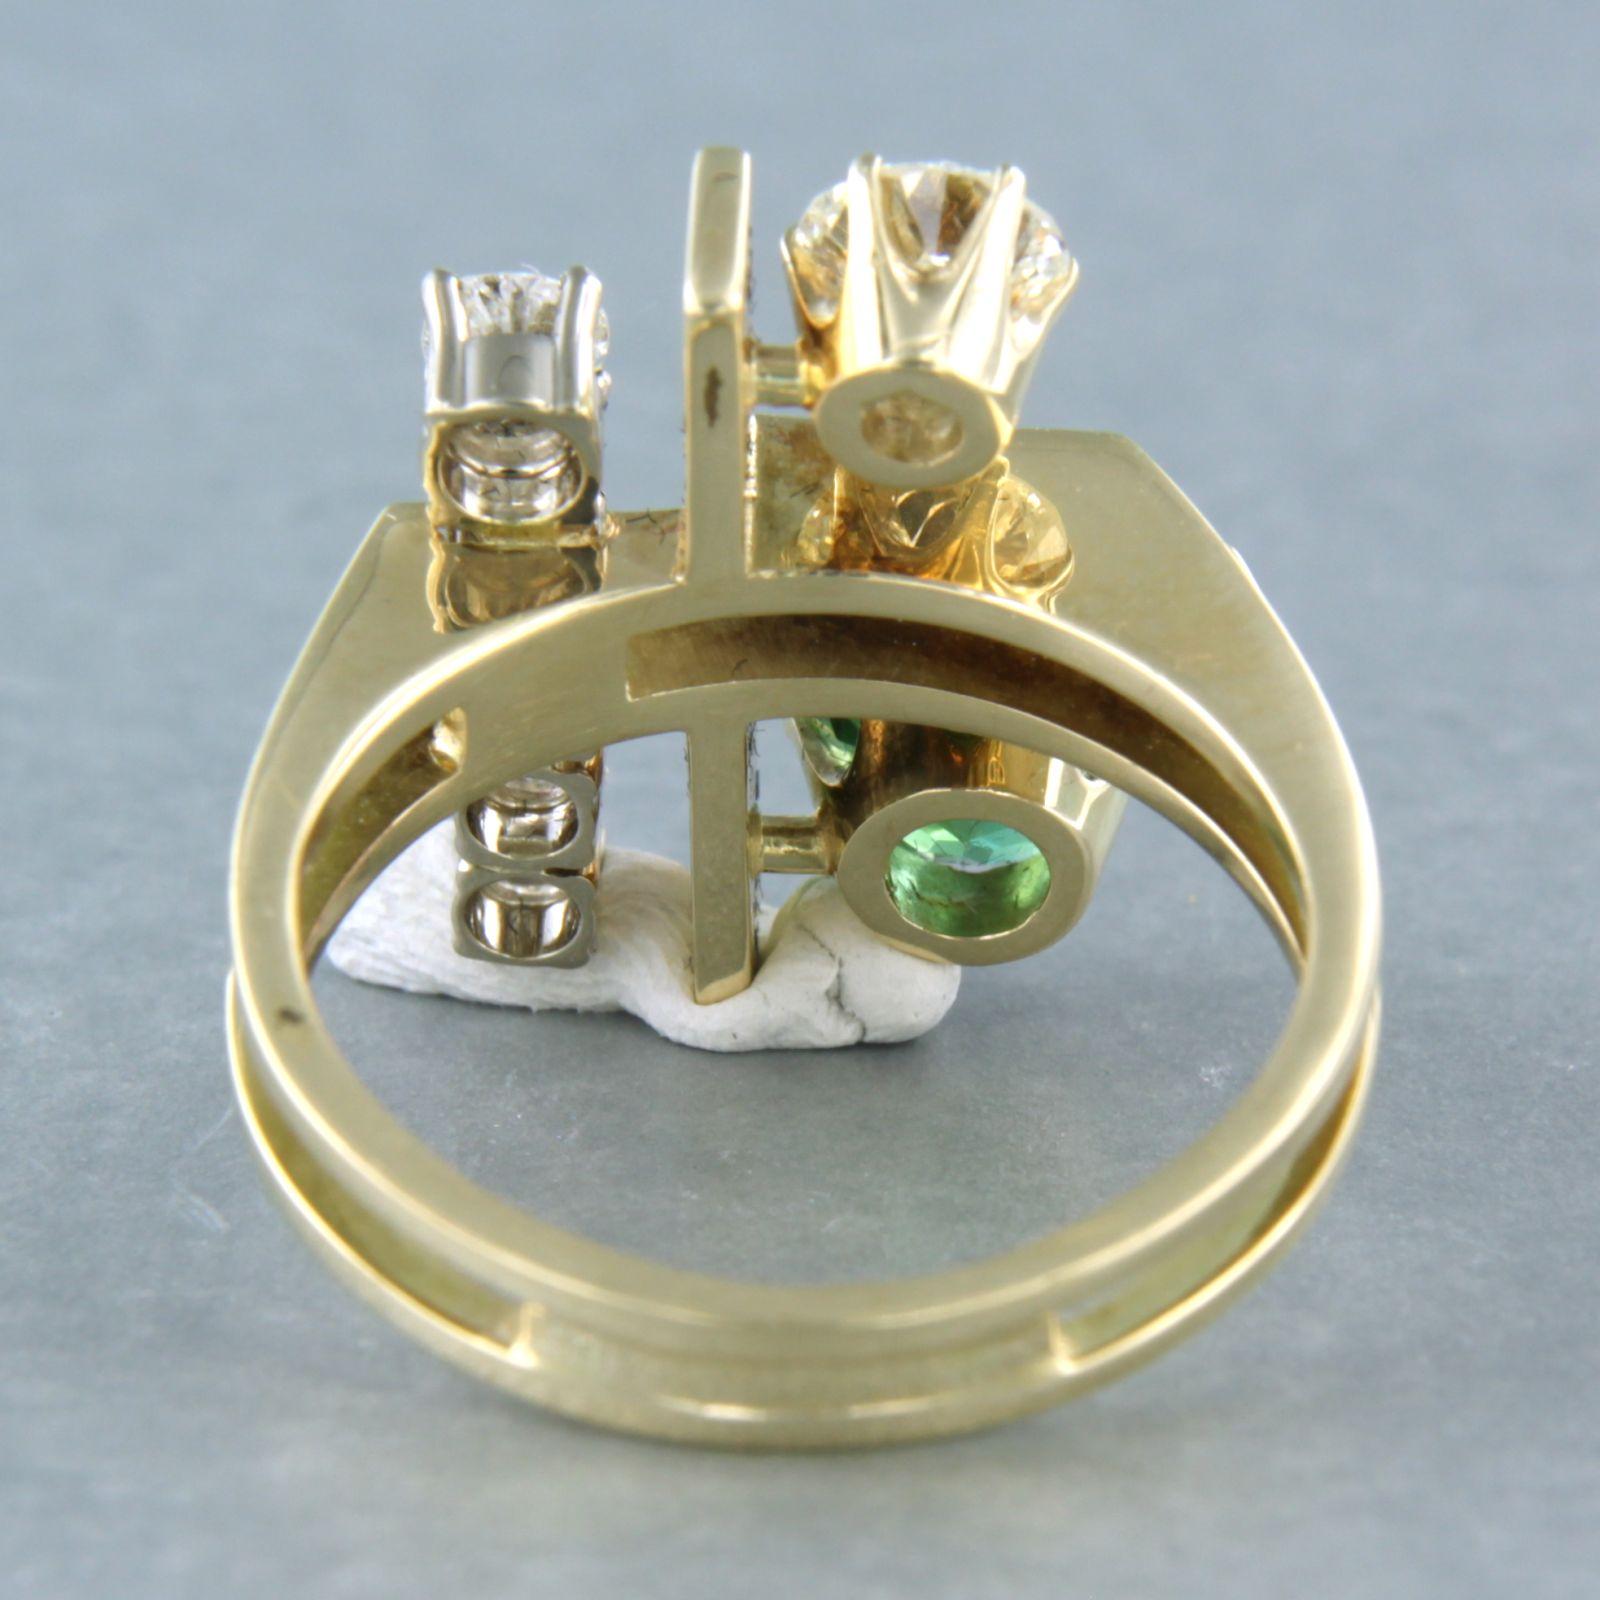 14k yellow gold ring set with tourmaline and old mine cut diamond. 1.40ct – G/H – SI/Piq1 - ring size U.S. 7.5 - EU. 17.75(56)

detailed description:

The top of the ring is 2.0 cm wide by 6.3 mm high

Ring size US 7.5 - EU. 17.75(56), rings can be